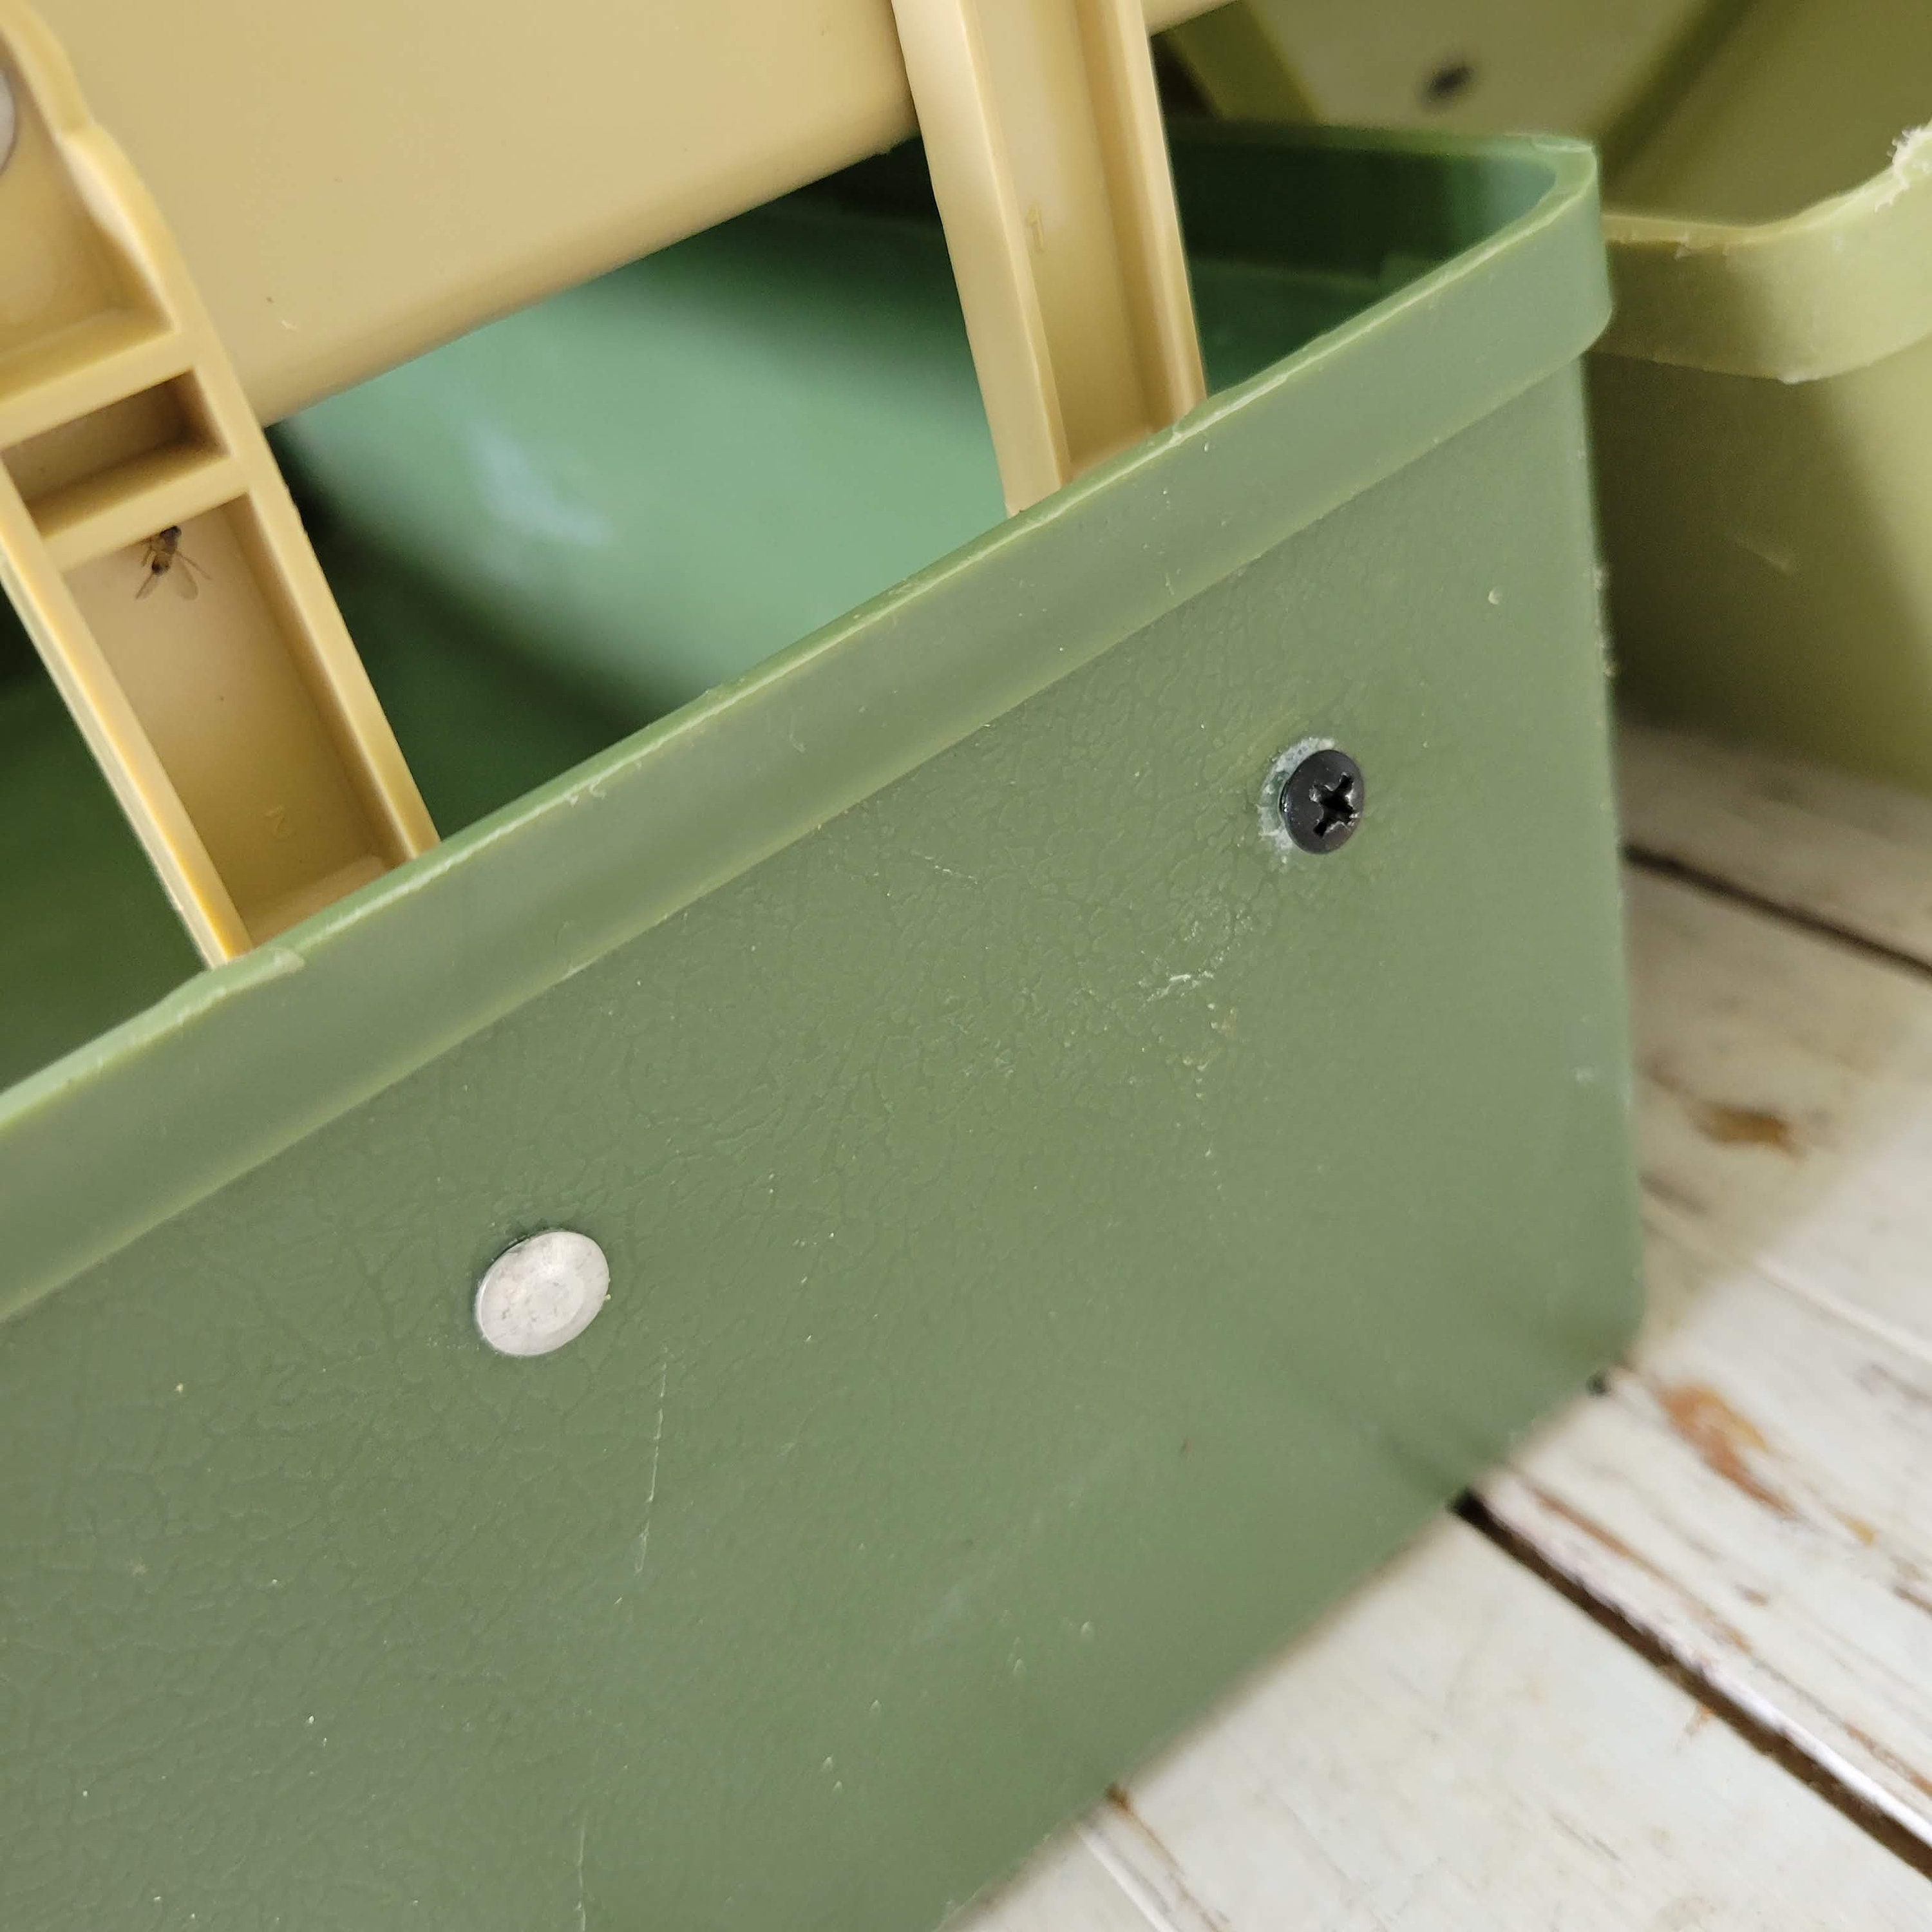 Vintage Plano Tackle Box Green and Gold 3 Shelf Multiple Compartments Heavy  Duty Tackle Box 